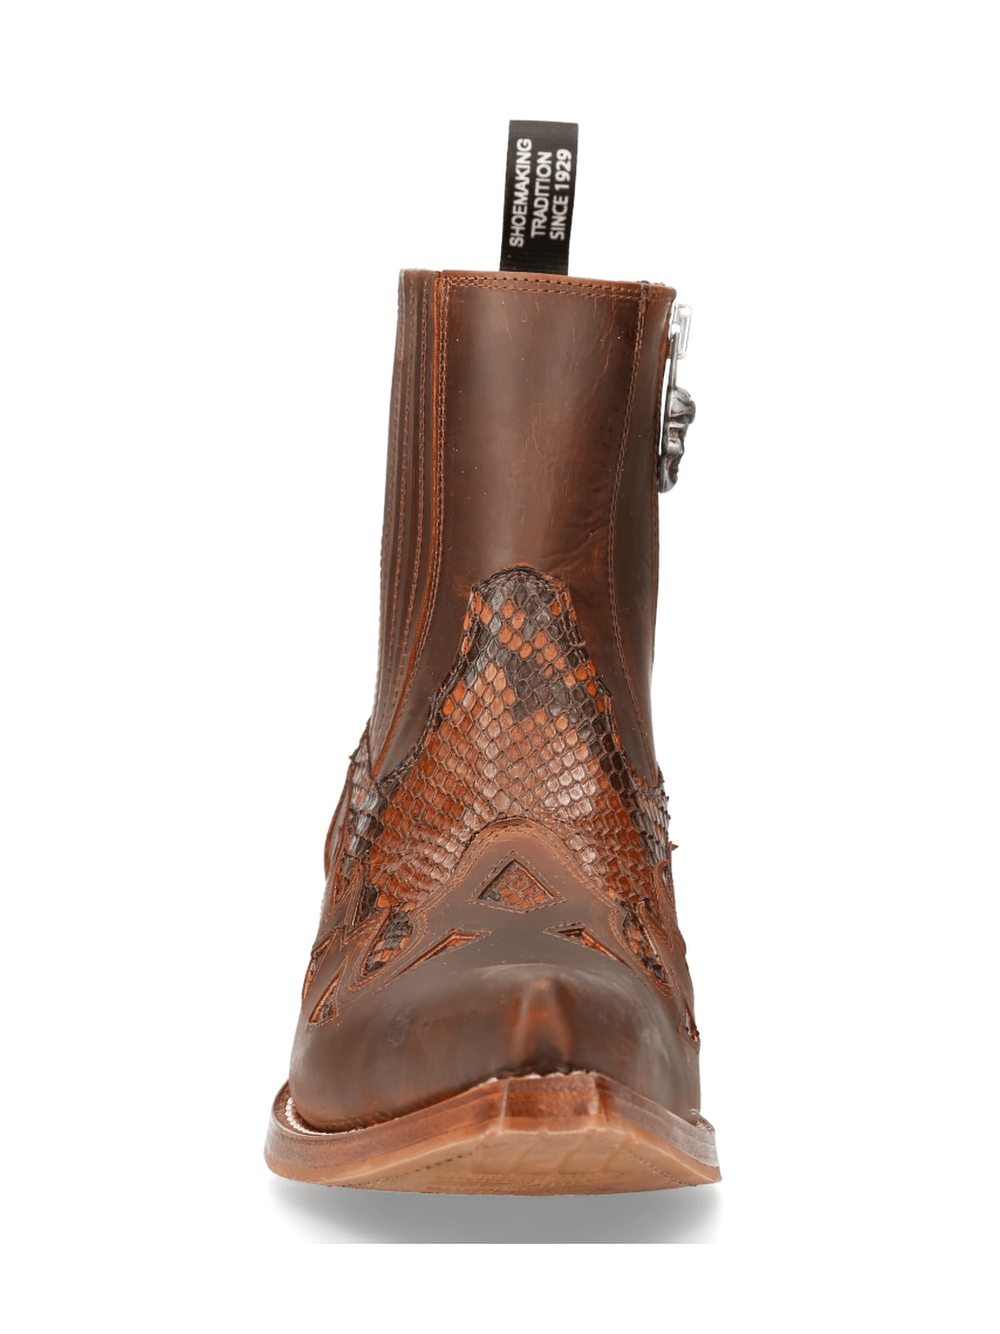 NEW ROCK Zippered Brown Leather Ankle Boots with Detailbi